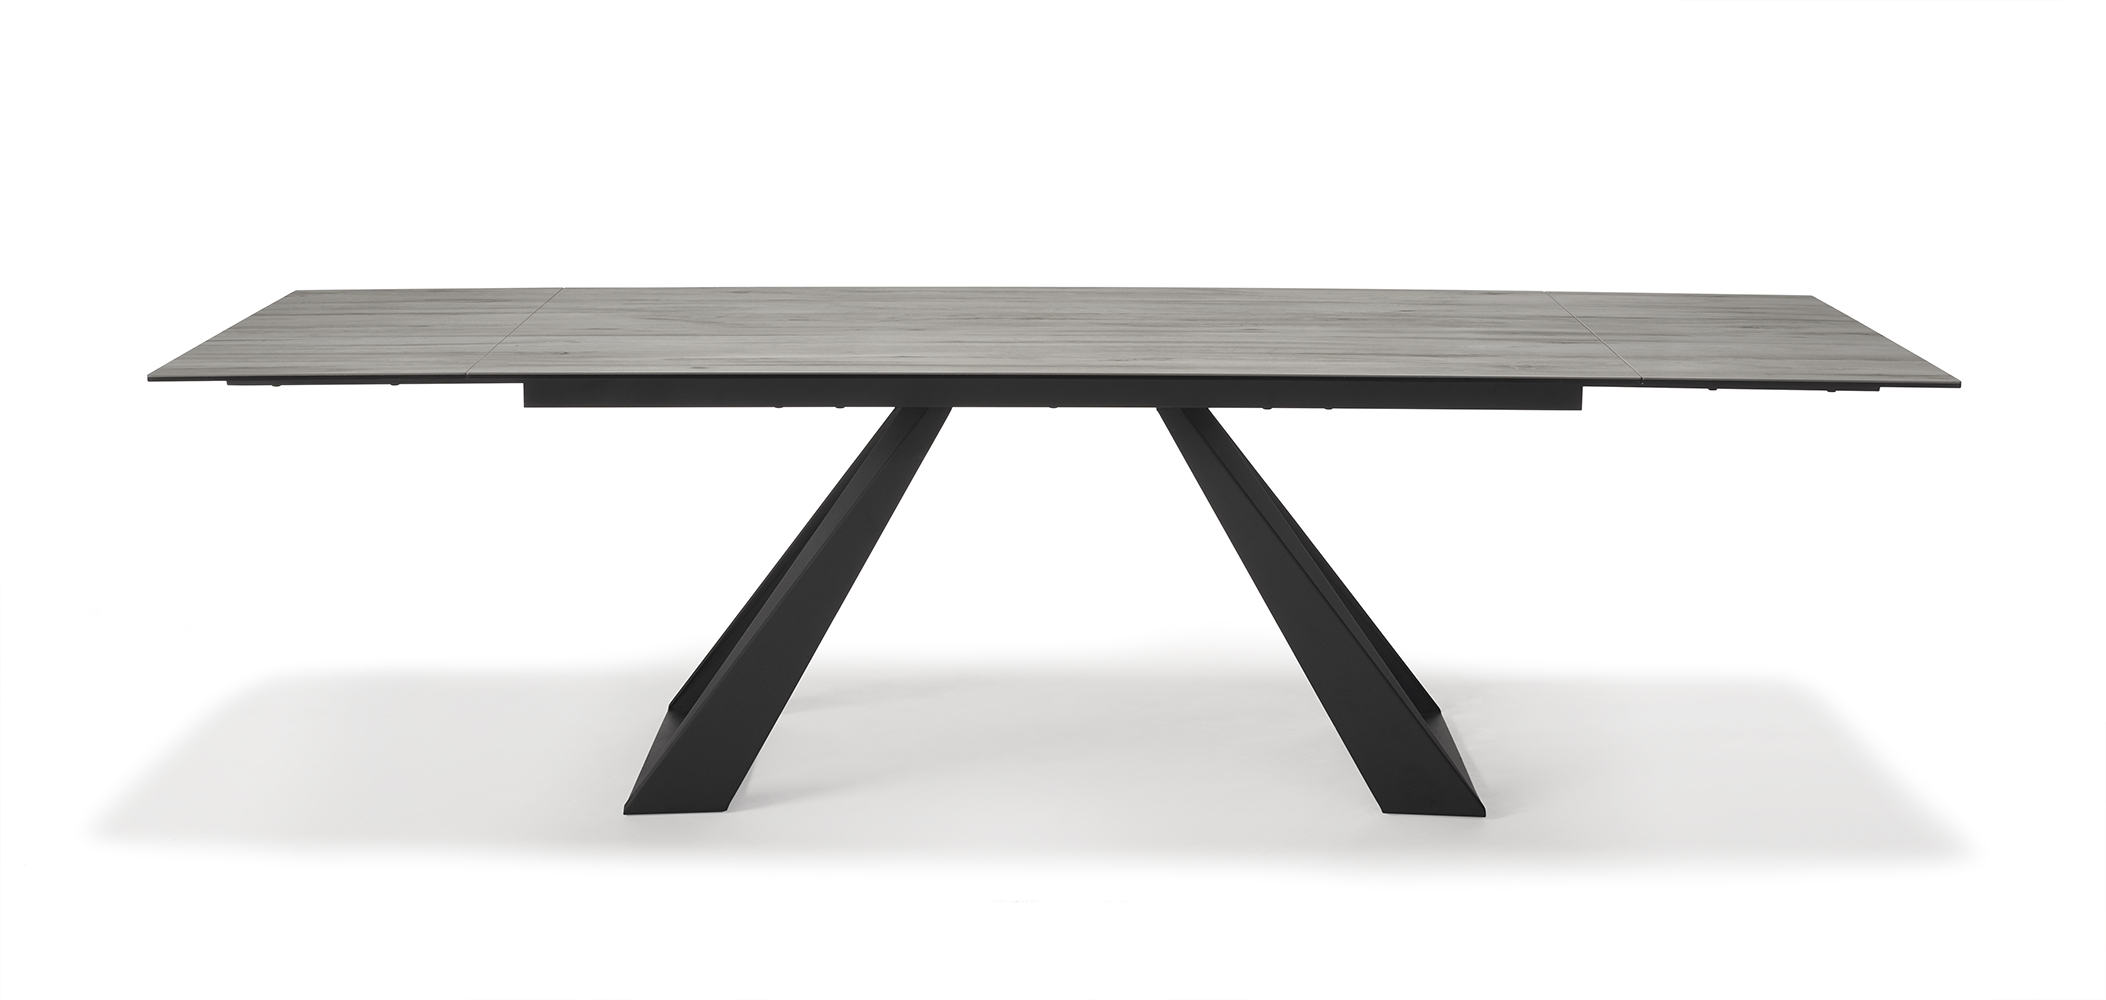 Spartan Dining Table by Kesterport The Spartan Dining Table is part of a sophisticated collection of - Image 2 of 4